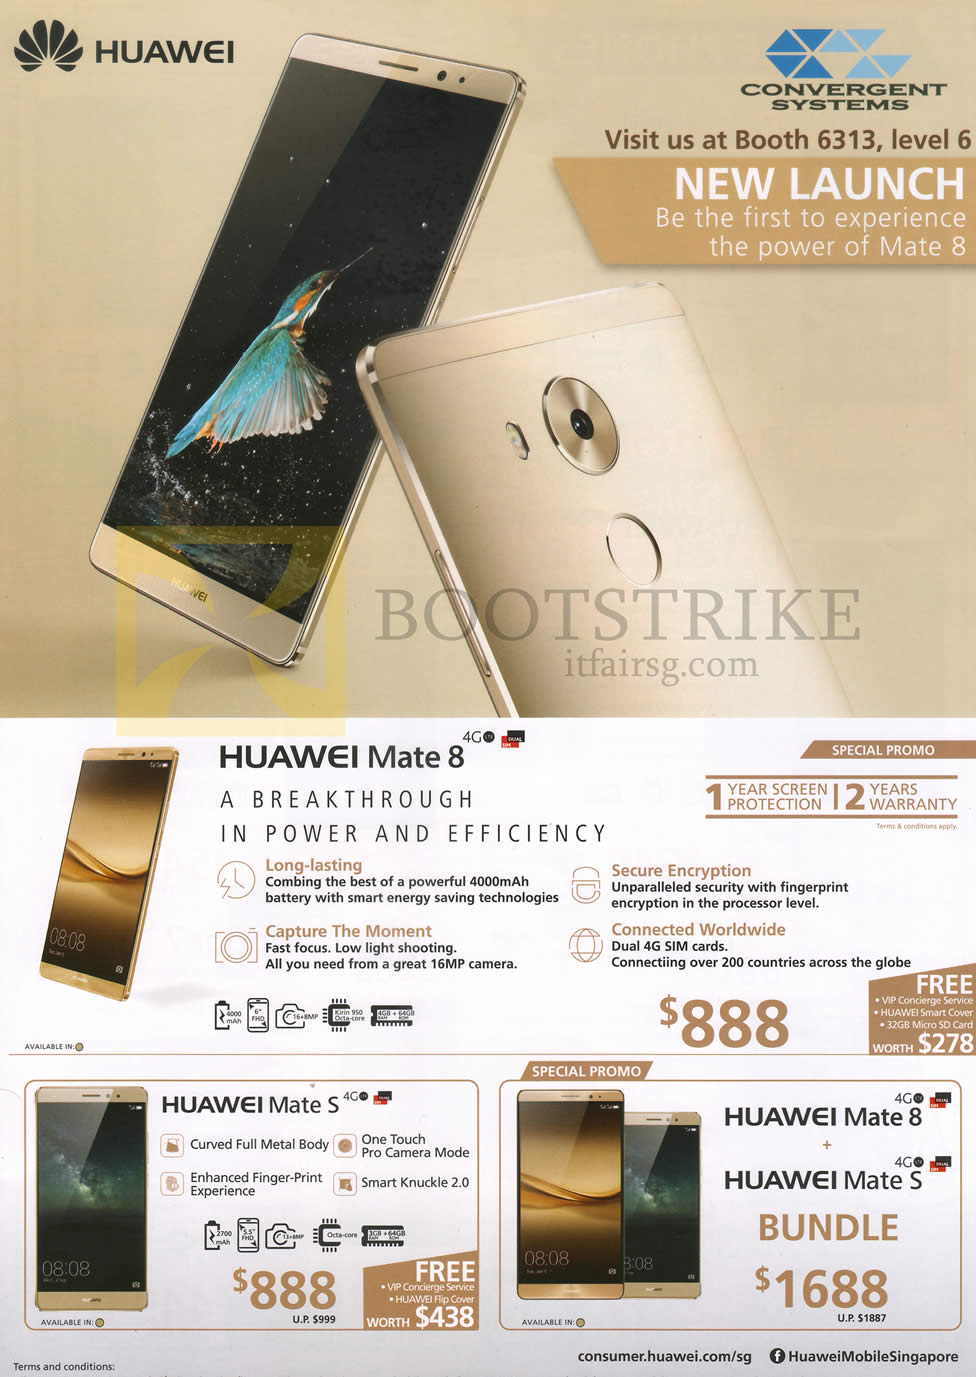 IT SHOW 2016 price list image brochure of Convergent Huawei Mobile Phones Mate 8, S